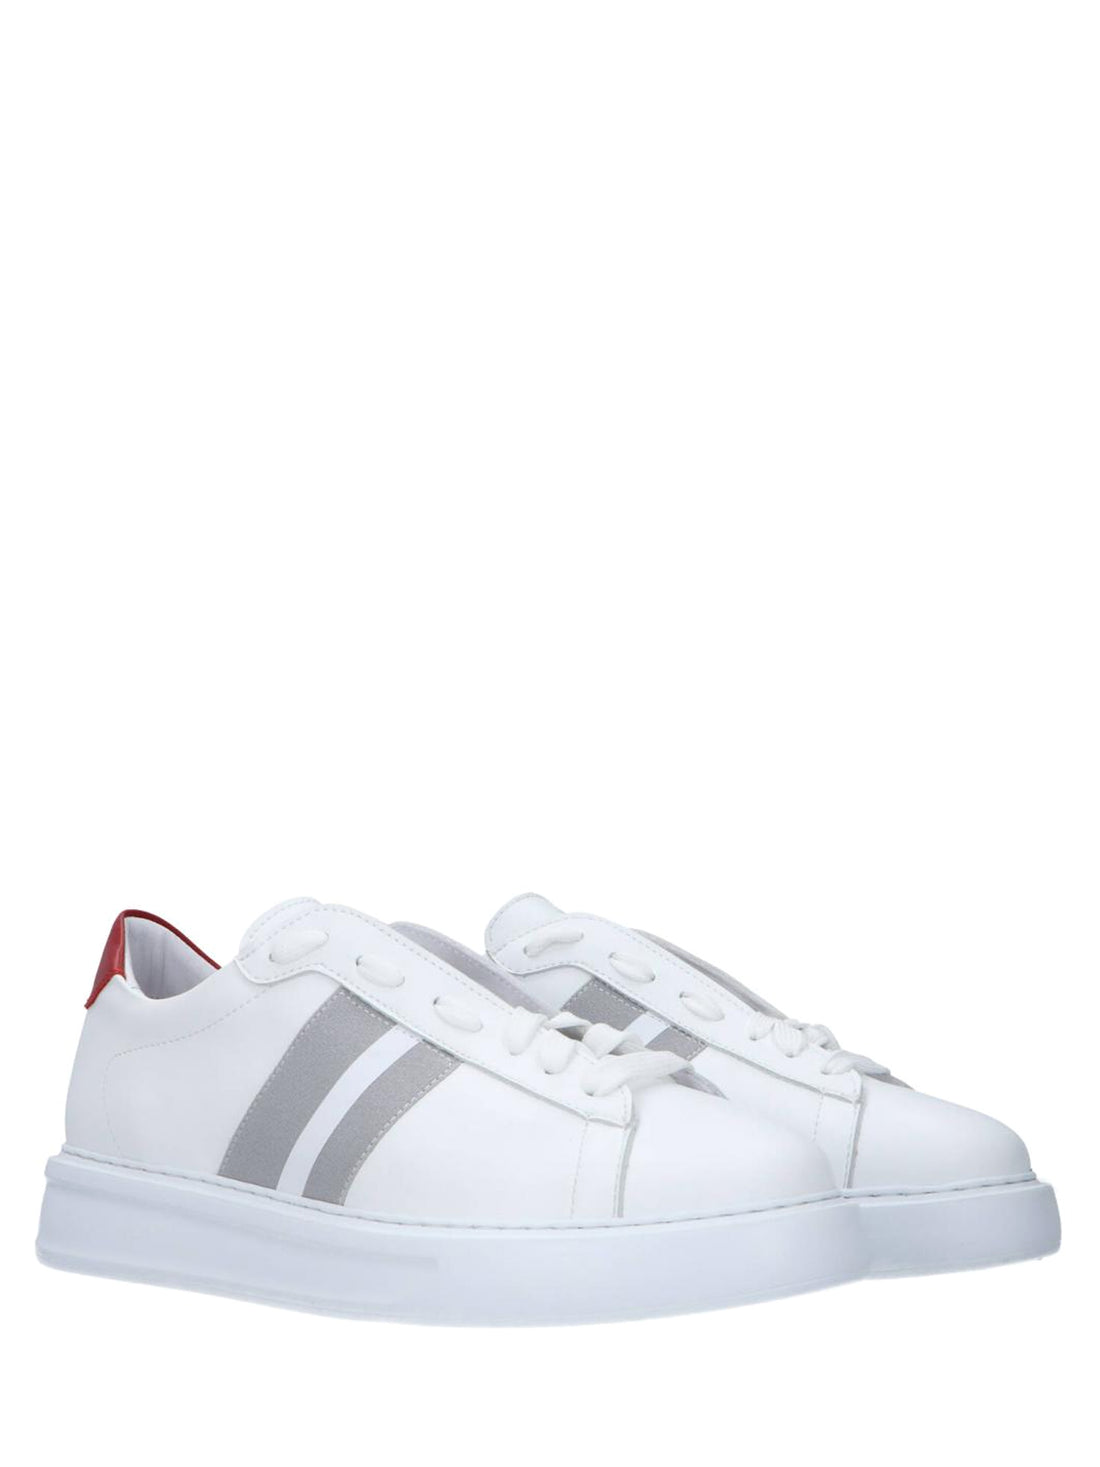 Sneakers Bianco Rosso Exton